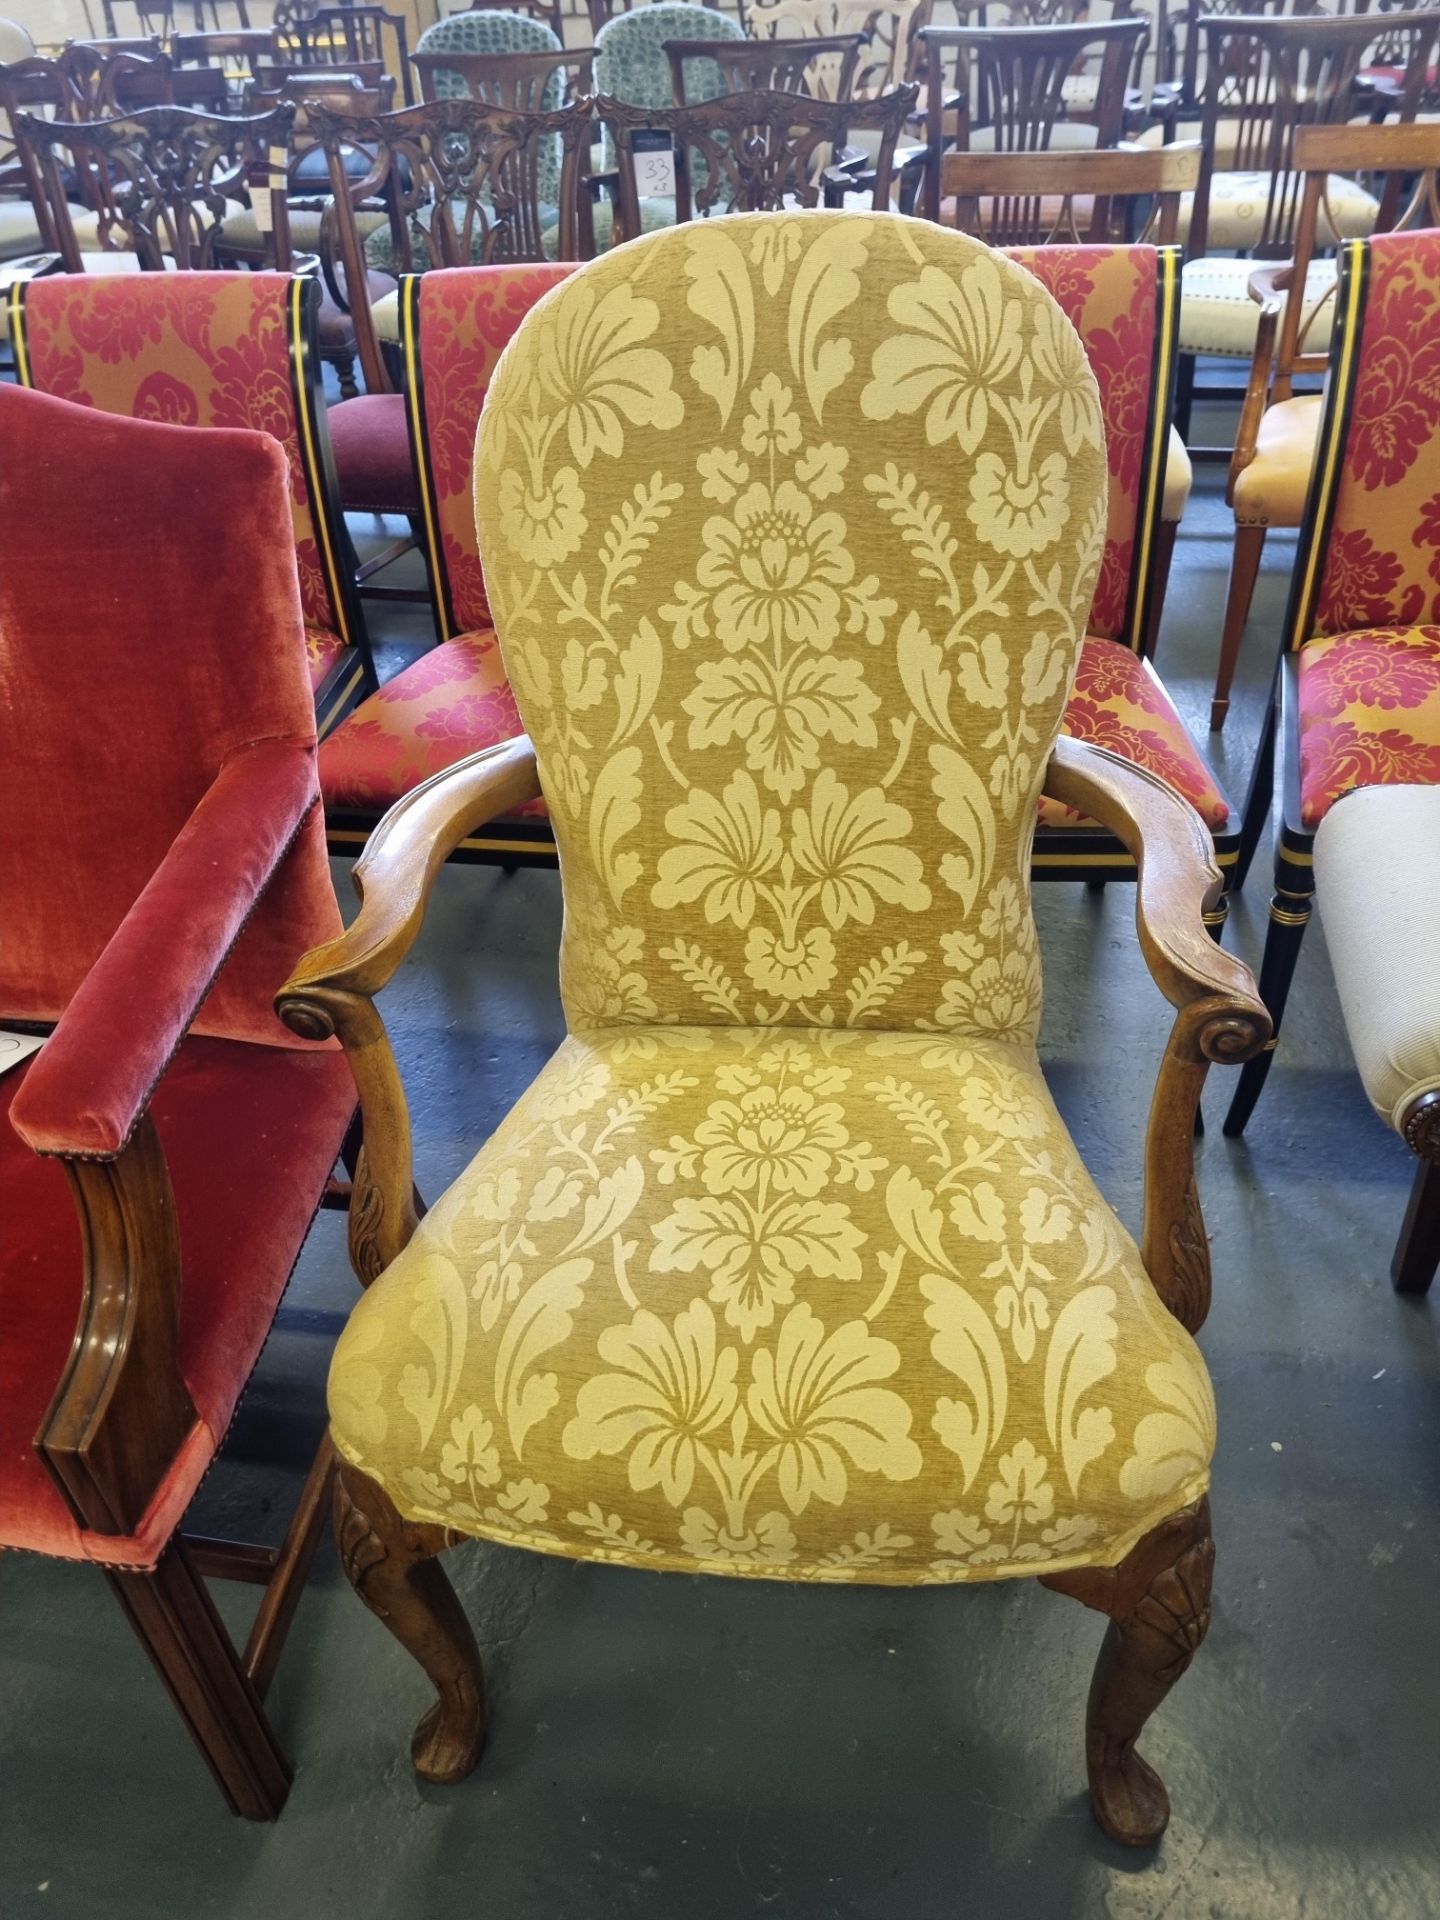 Arthur Brett Upholstered High Back Arm Chair With Beautiful Curved Arms And Legs Height 110cm